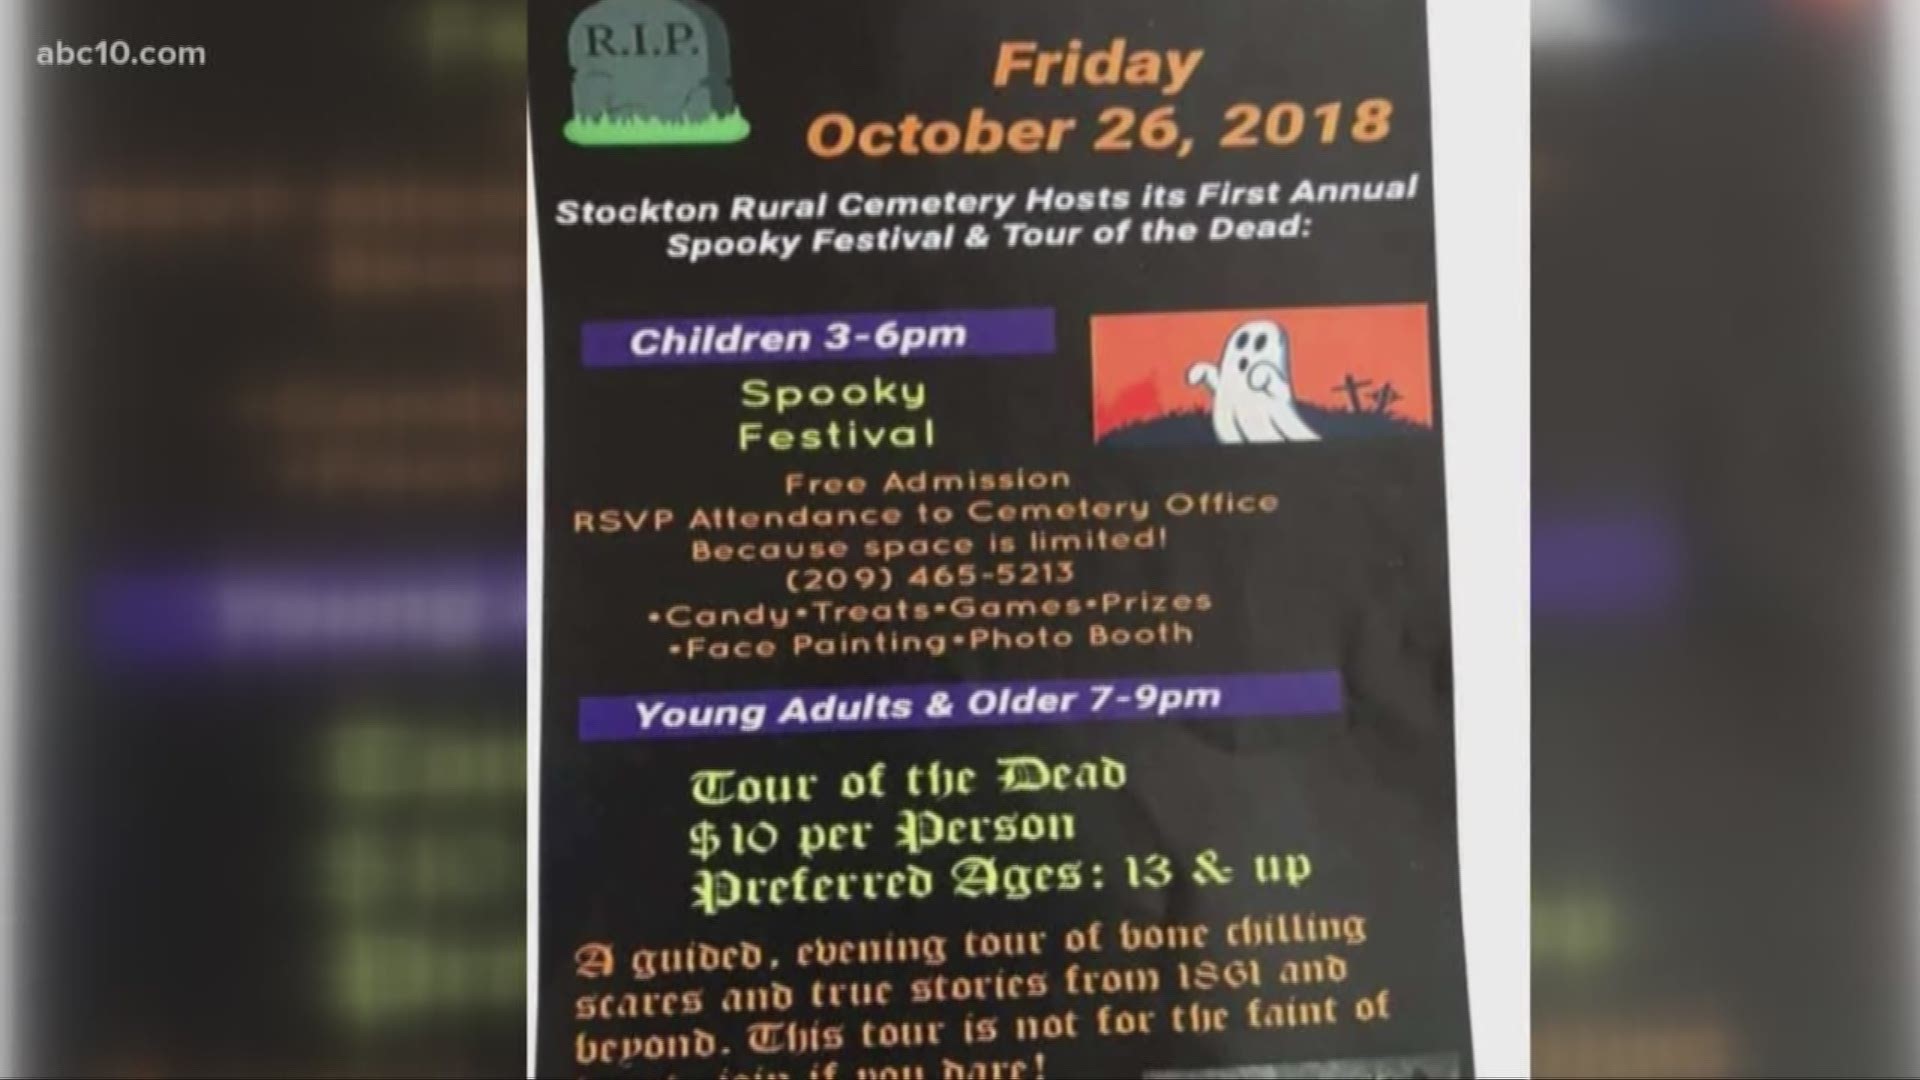 Called the "First Annual Spooky Festival & Tour of the Dead," the event will feature a children's festival, including face painting and games, as well as an adult "Tour of the Dead" for $10 at night.